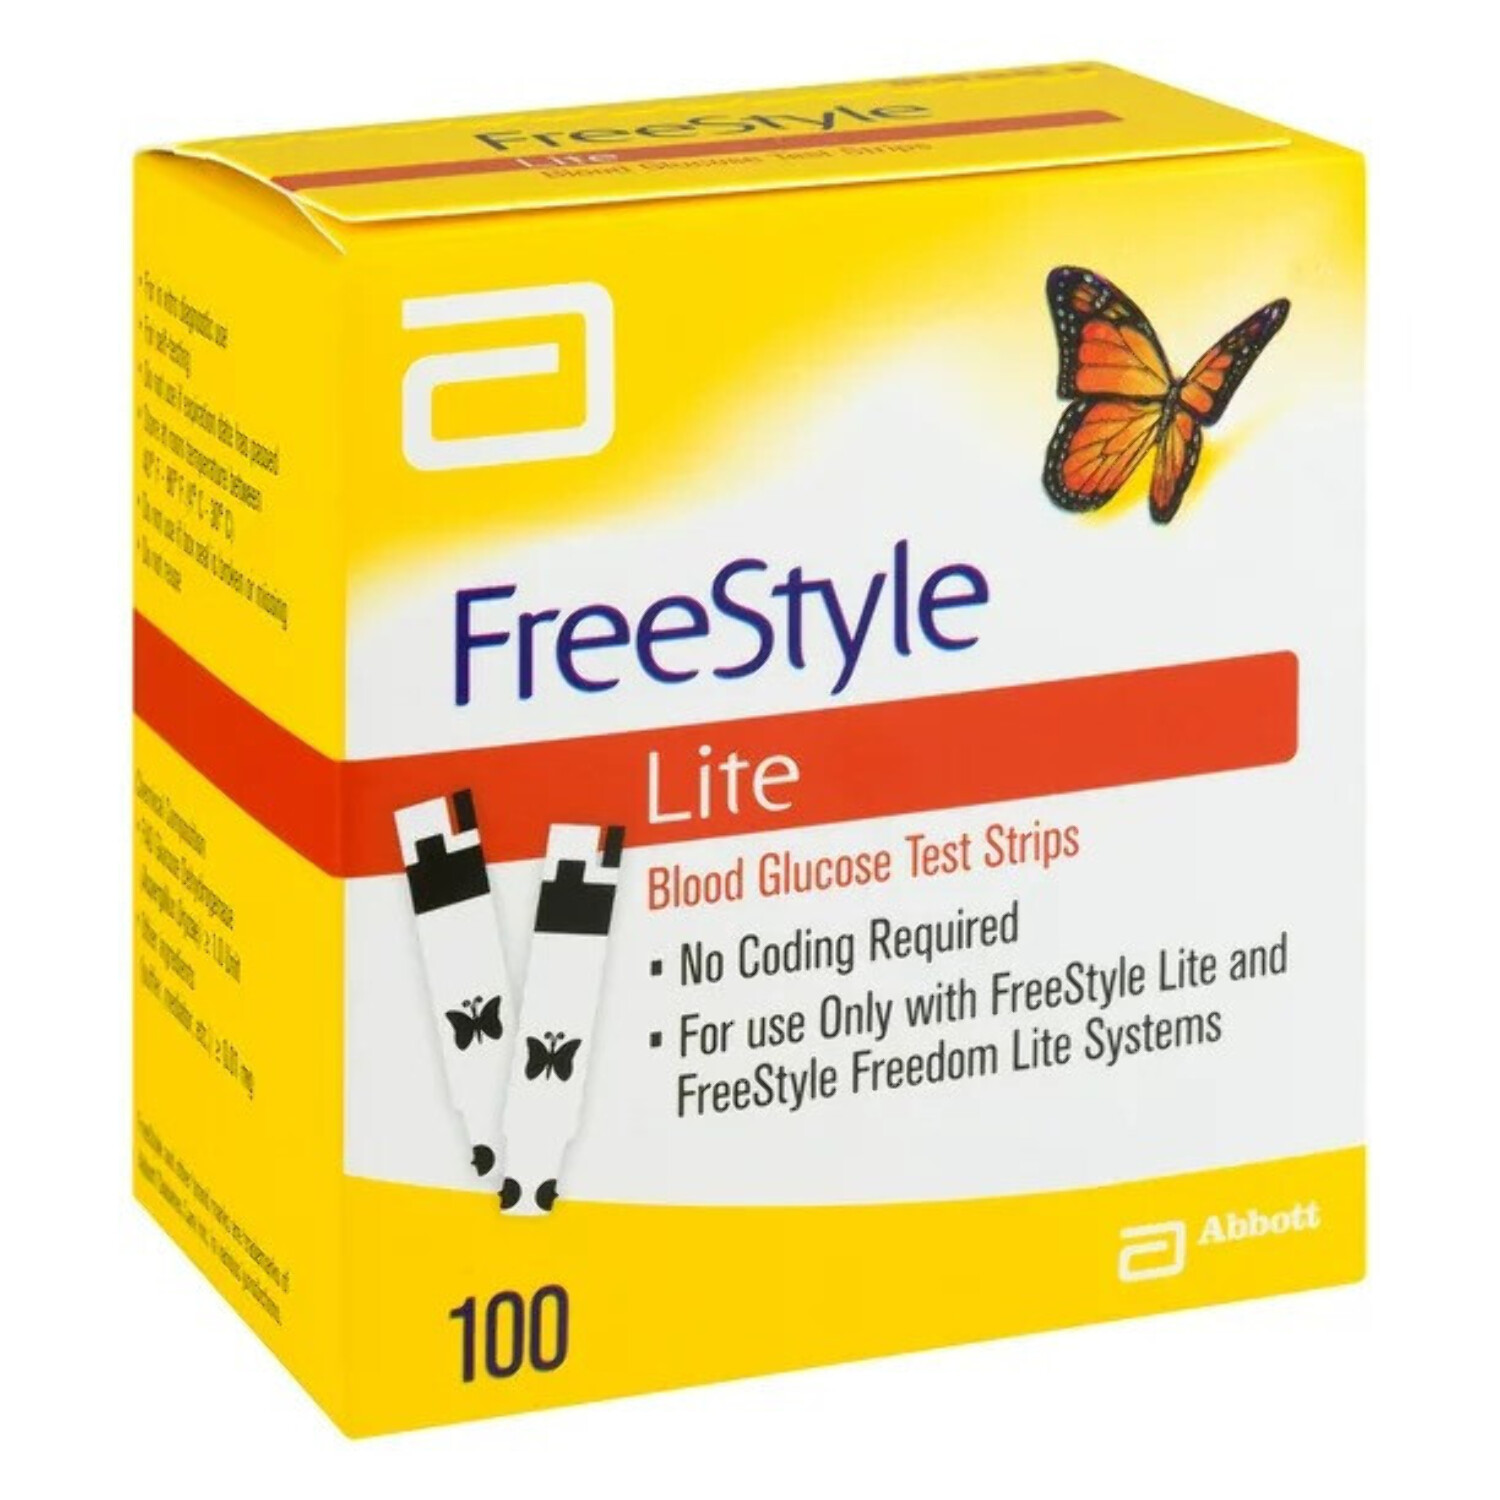 FreeStyle Lite Blood Glucose Test Strips, 100 Count - image 5 of 5